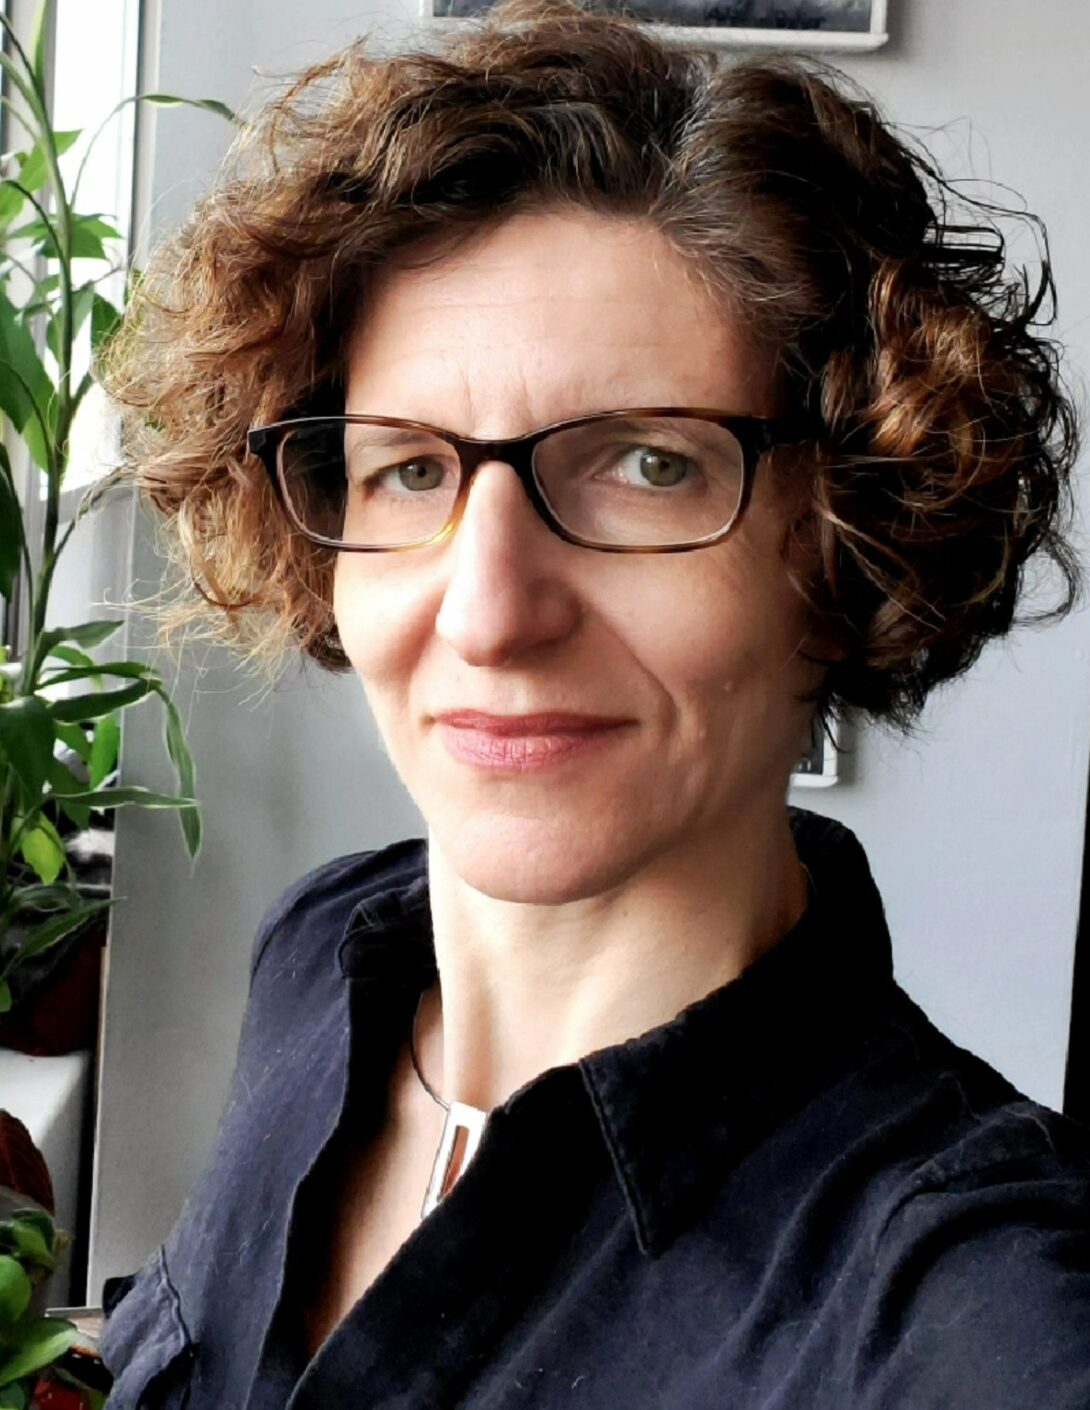 Closeup headshot of white woman with glasses, staring into camera. She has short curly dark brown hair, rectangular rimmed glasses, and is wearing a black collared shirt.